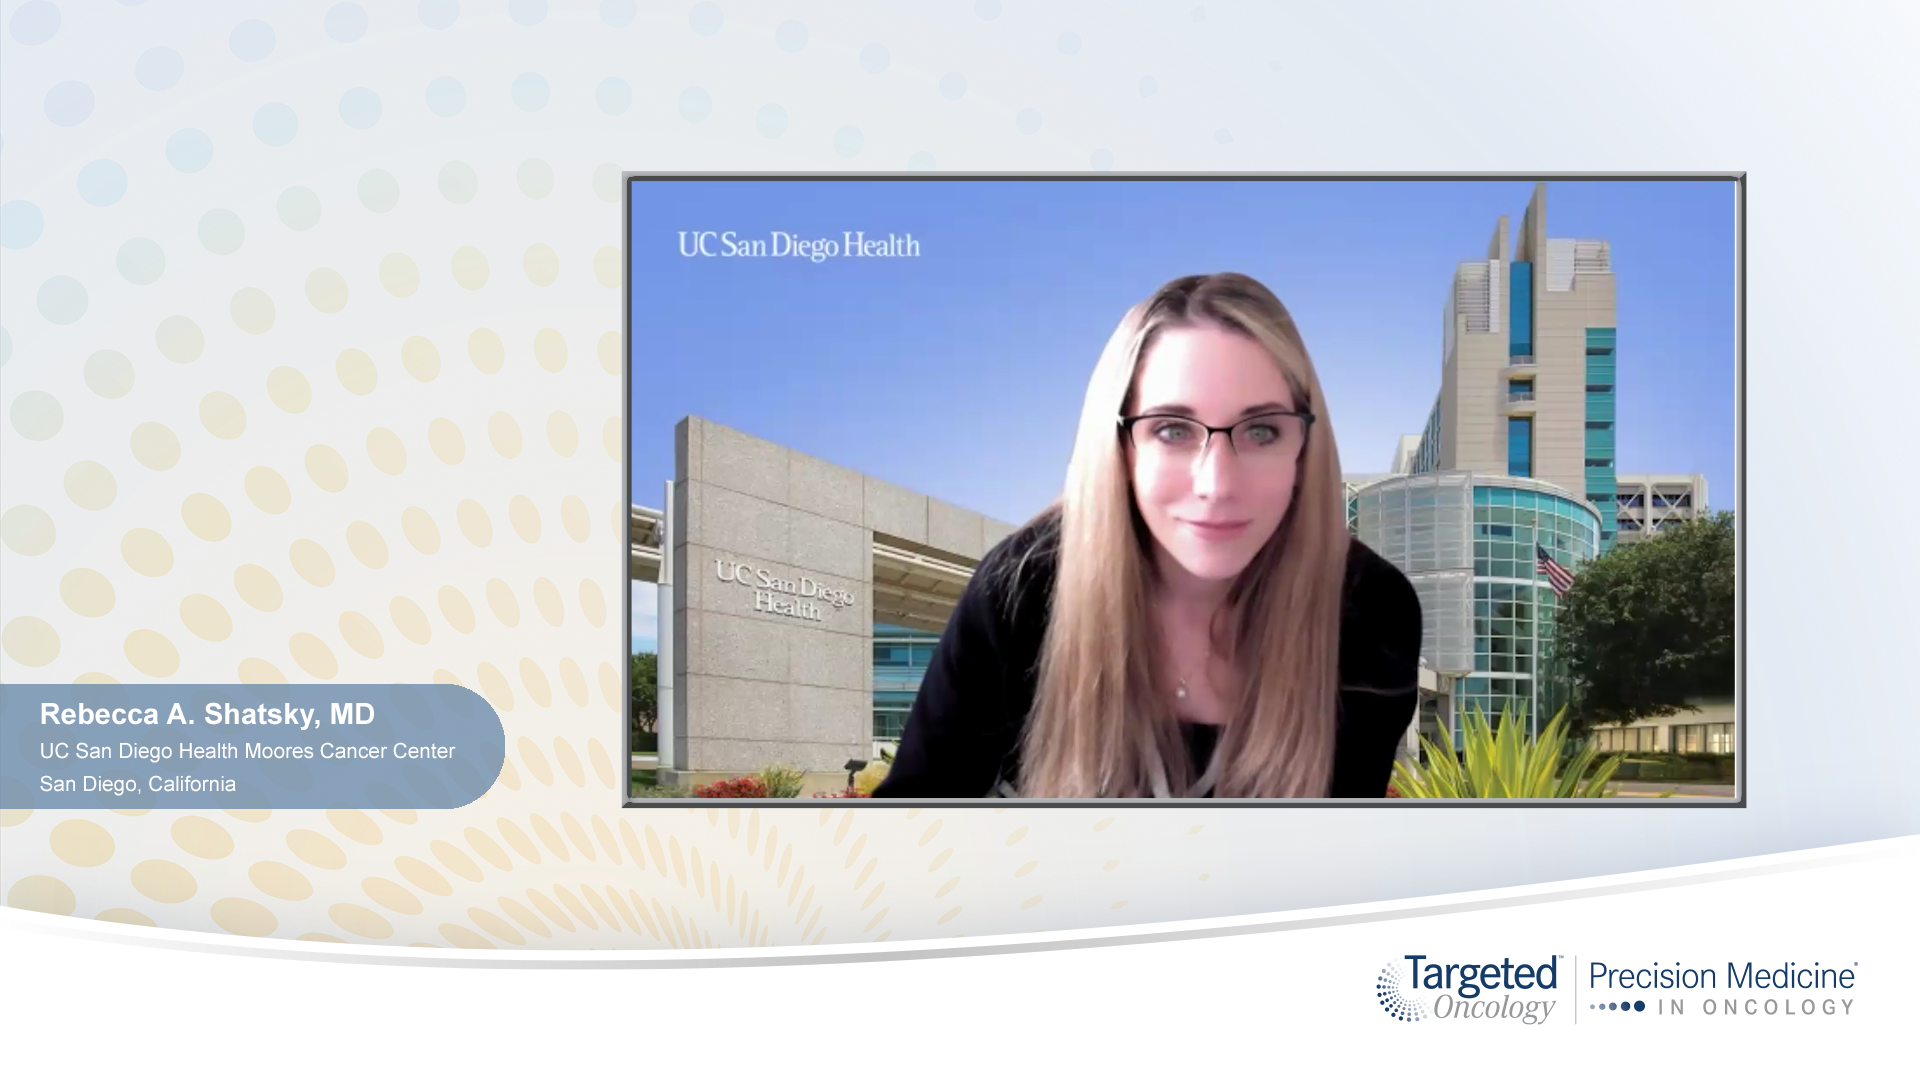 Video 2 - "Overview of HER2-Targeting Agents in Breast Cancer and Treatment Selection Approaches"